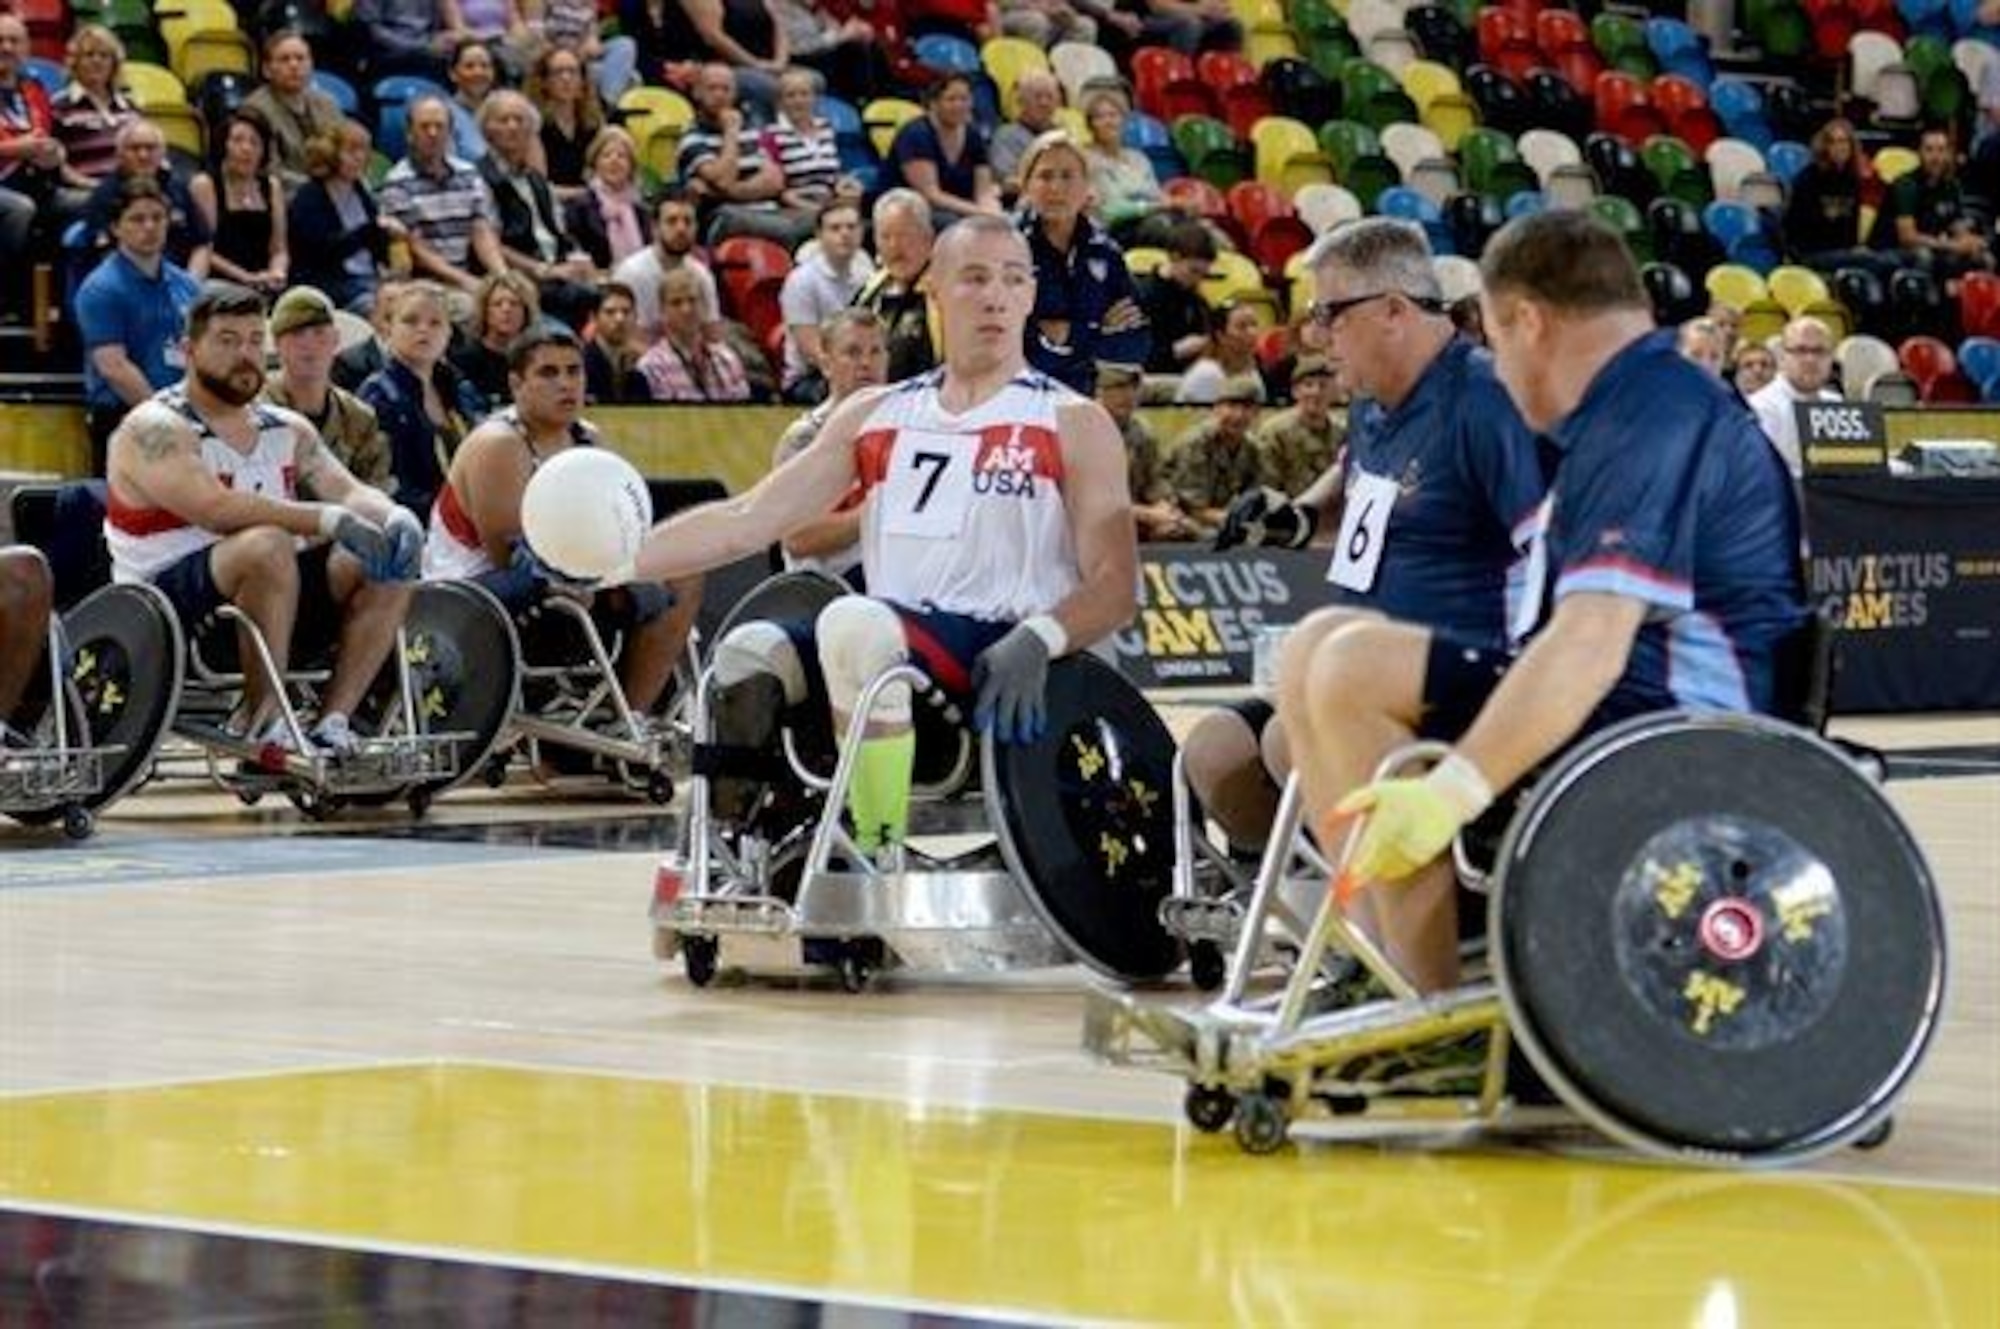 Army Sgt. Ryan McIntosh, representing the U.S., passes the ball around two defenders during a wheelchair rugby match against Australia Sept. 12, 2014, at the 2014 Invictus Games in London. The U.S. won the match 14-4. Invictus Games is an international competition that brings together wounded, injured and ill service members in the spirit of friendly athletic competition. American Soldiers, Sailors, Airmen and Marines are representing the U.S. in the competition which is taking place Sept. 10-14. (U.S. Navy photo/Mass Communication Specialist 2nd Class Joshua D. Sheppard)
